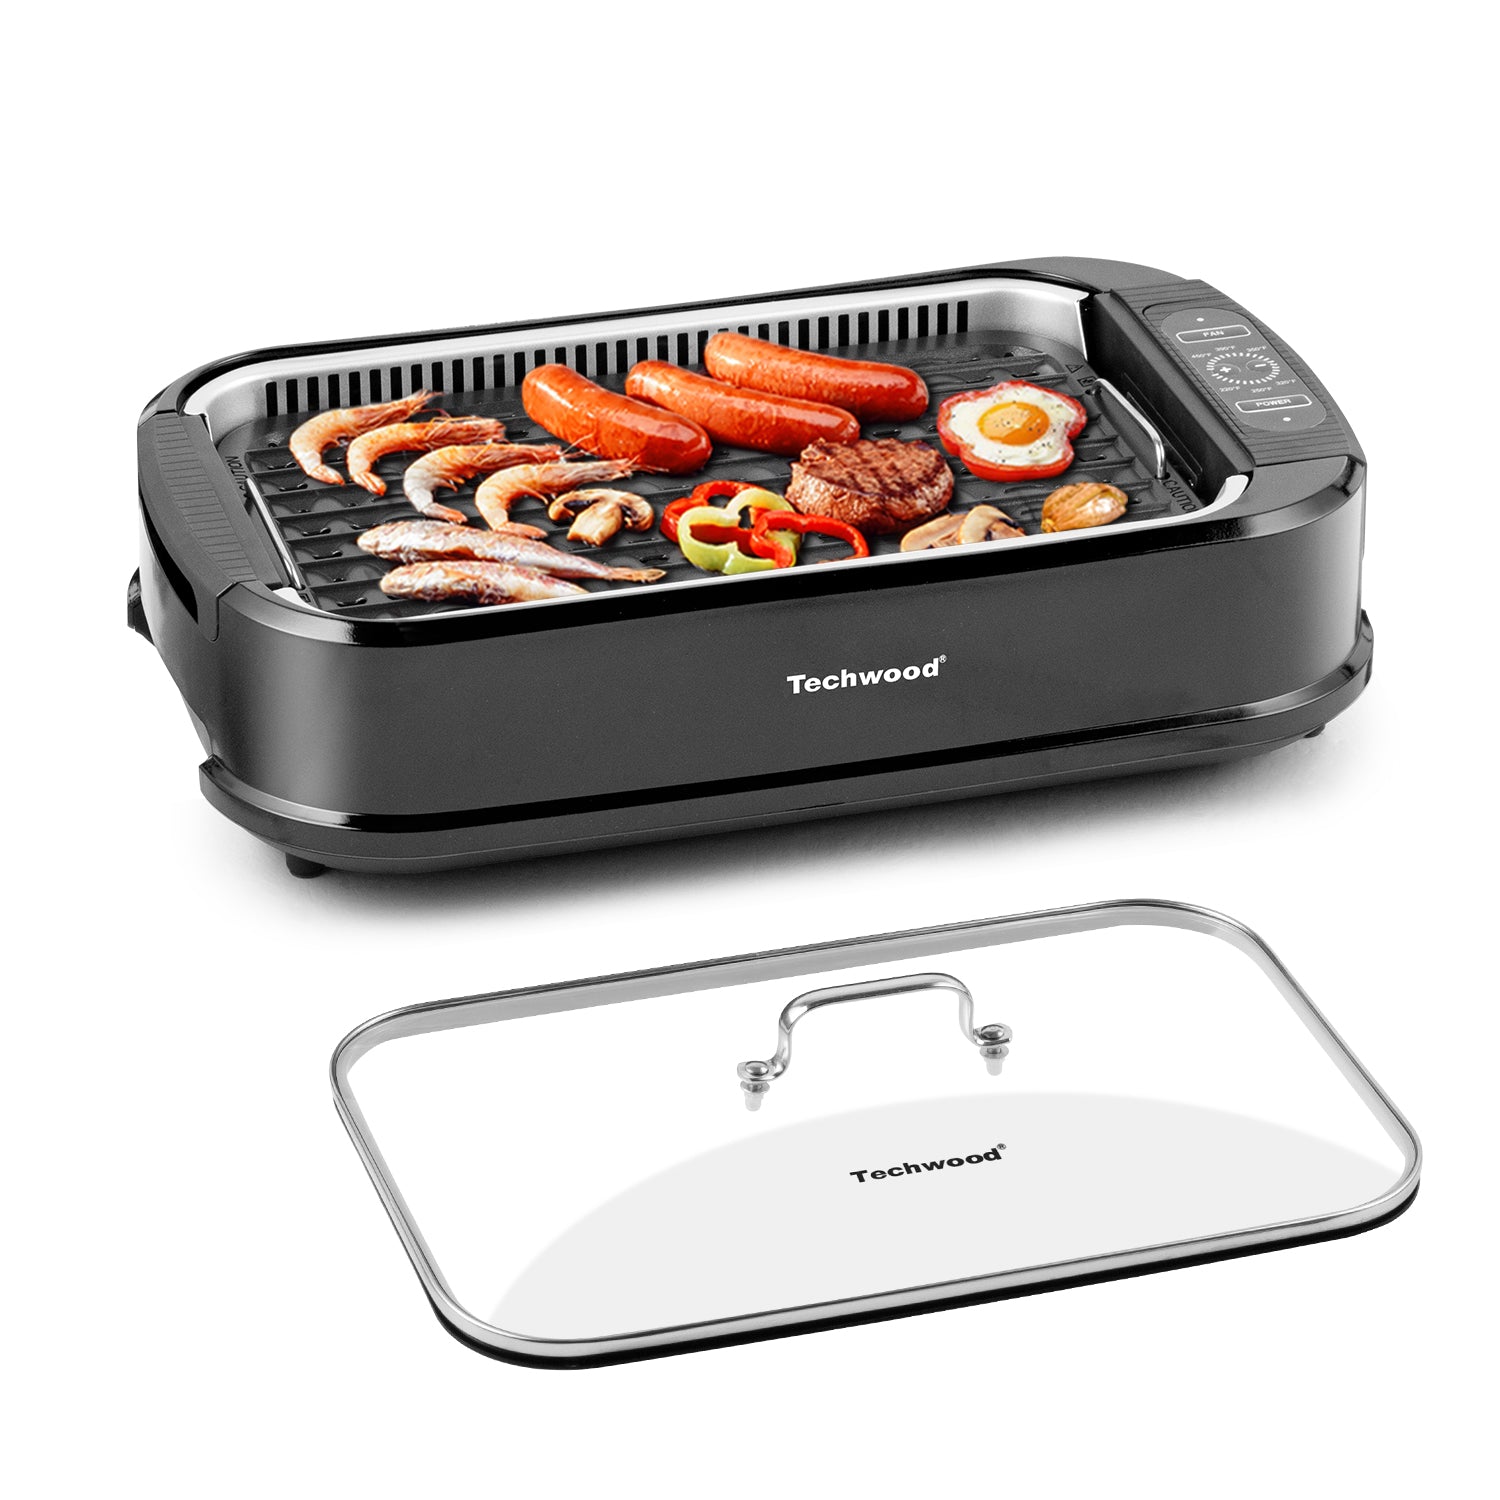 AS SEEN ON TV Smokeless Indoor Electric Grill POWER XLNon-Stick